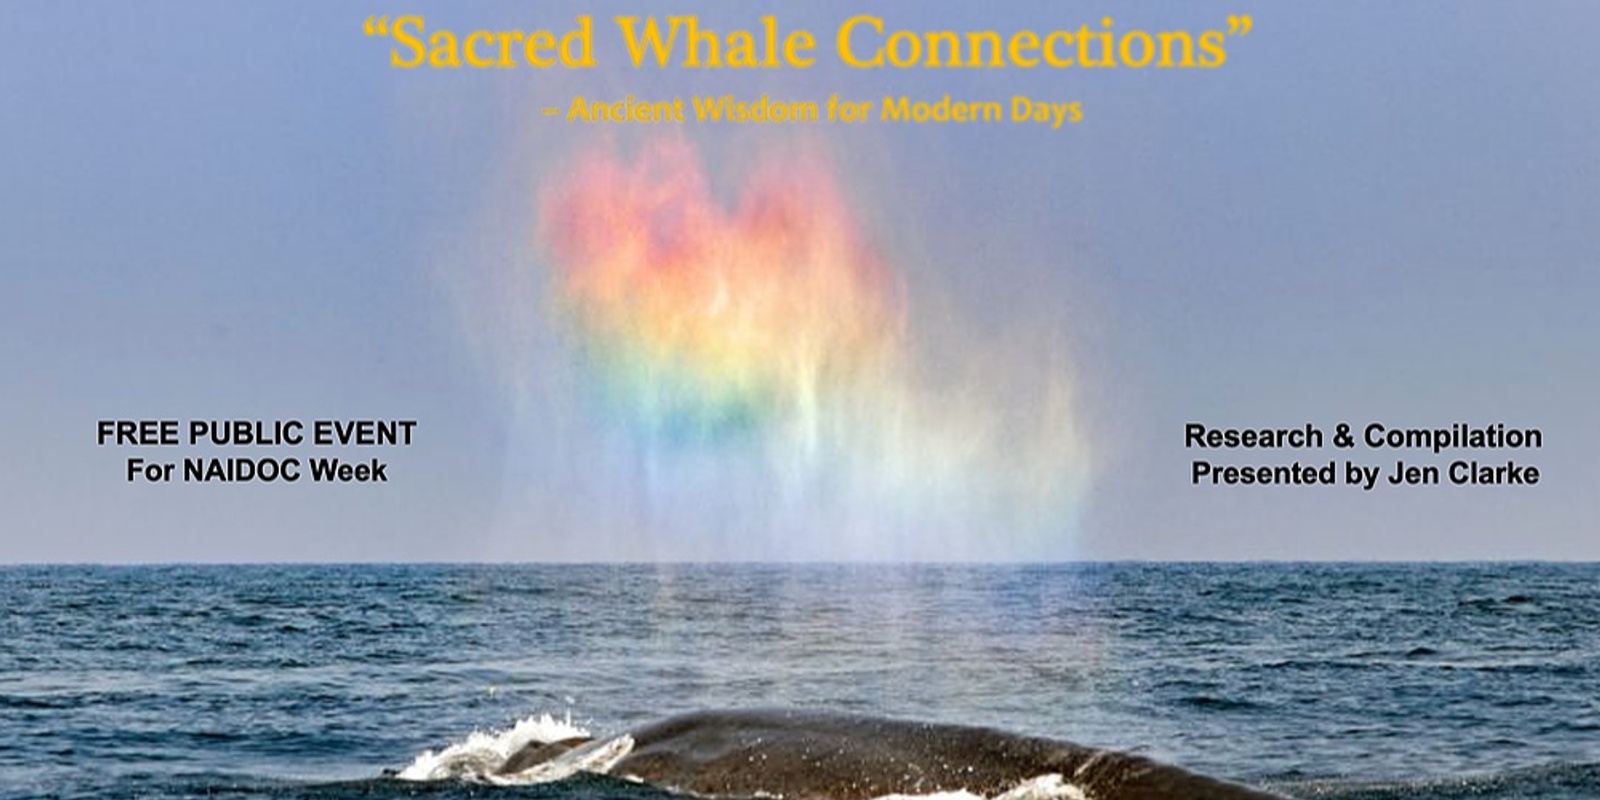 Banner image for WILLIAMSTOWN - NAIDOC WEEK "Sacred Whale Connections" - FREE PRESENTATION